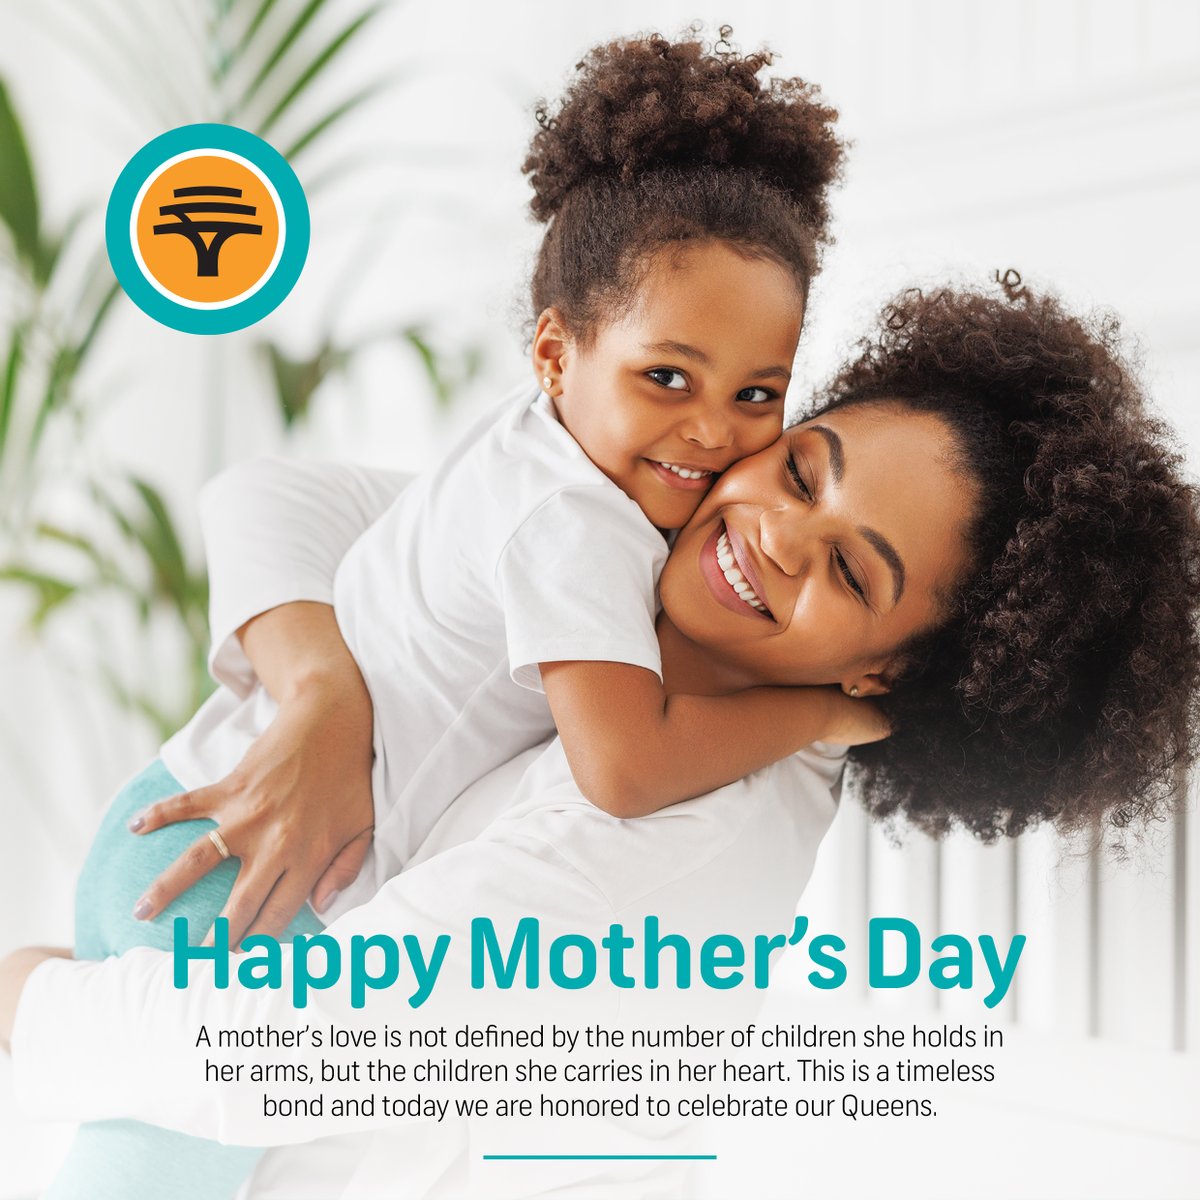 We hope your day is a beautiful and radiant as you are mom. Thank you for being the heart and soul of our families. Happy Mother's Day.

How are you celebrating your mom today? #MothersDay #LoveFNB